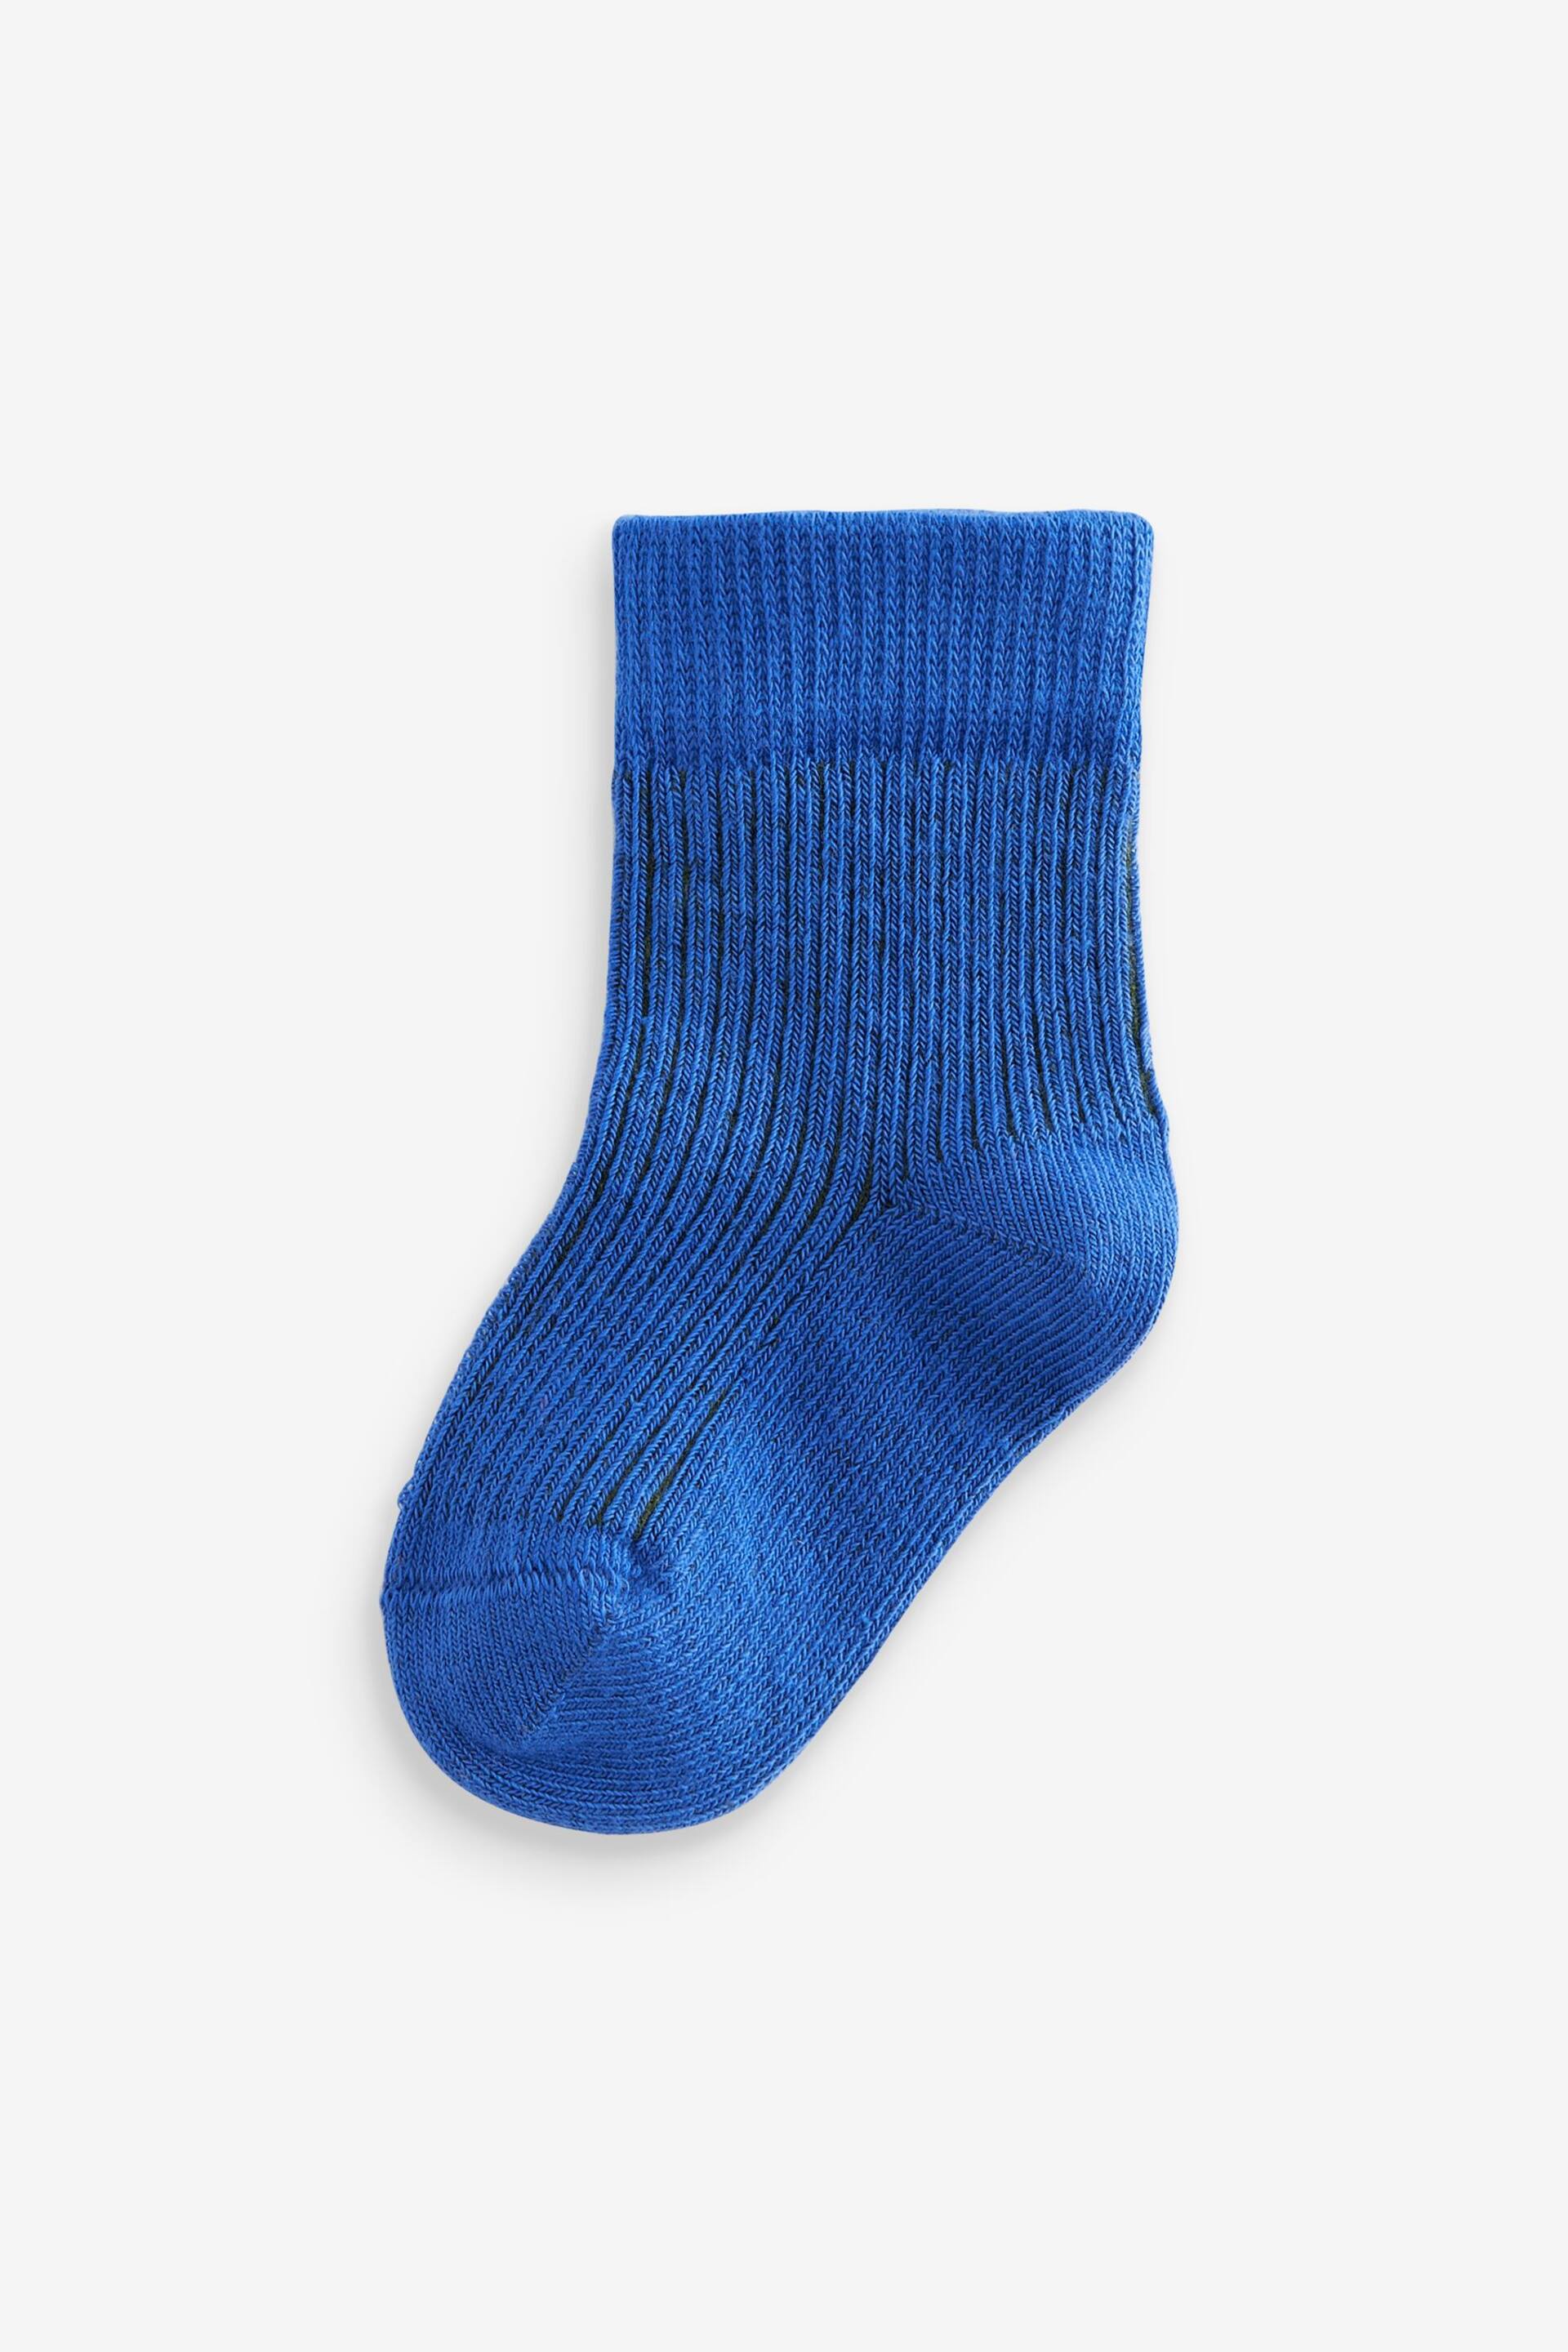 Blue Baby Socks 5 Pack (0mths-2yrs) - Image 2 of 6